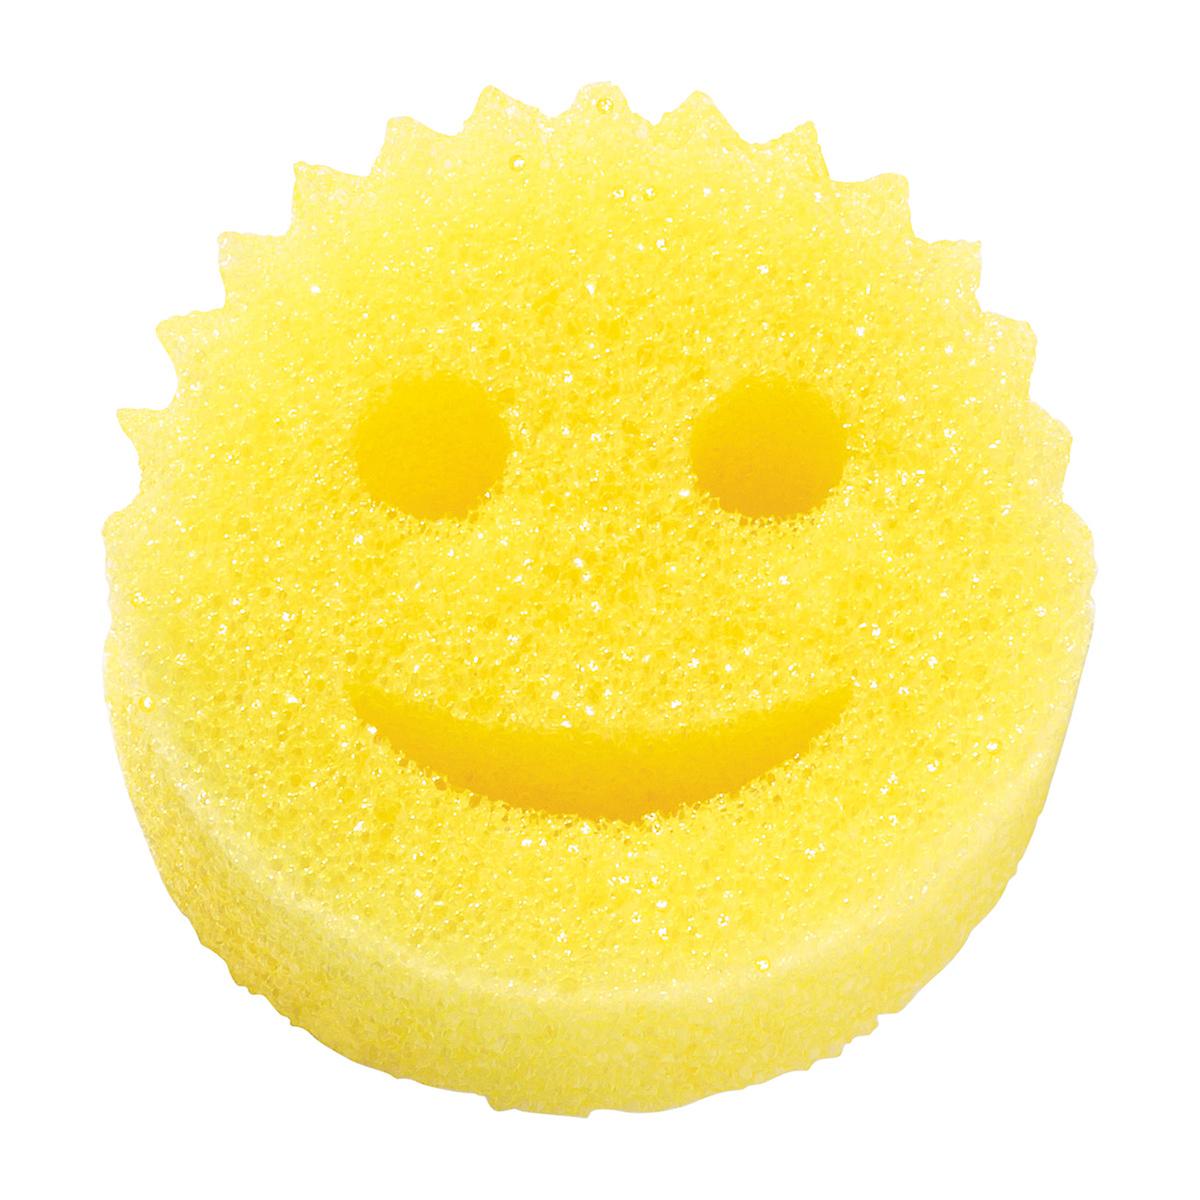 He's the daddy of the Scrub Daddy